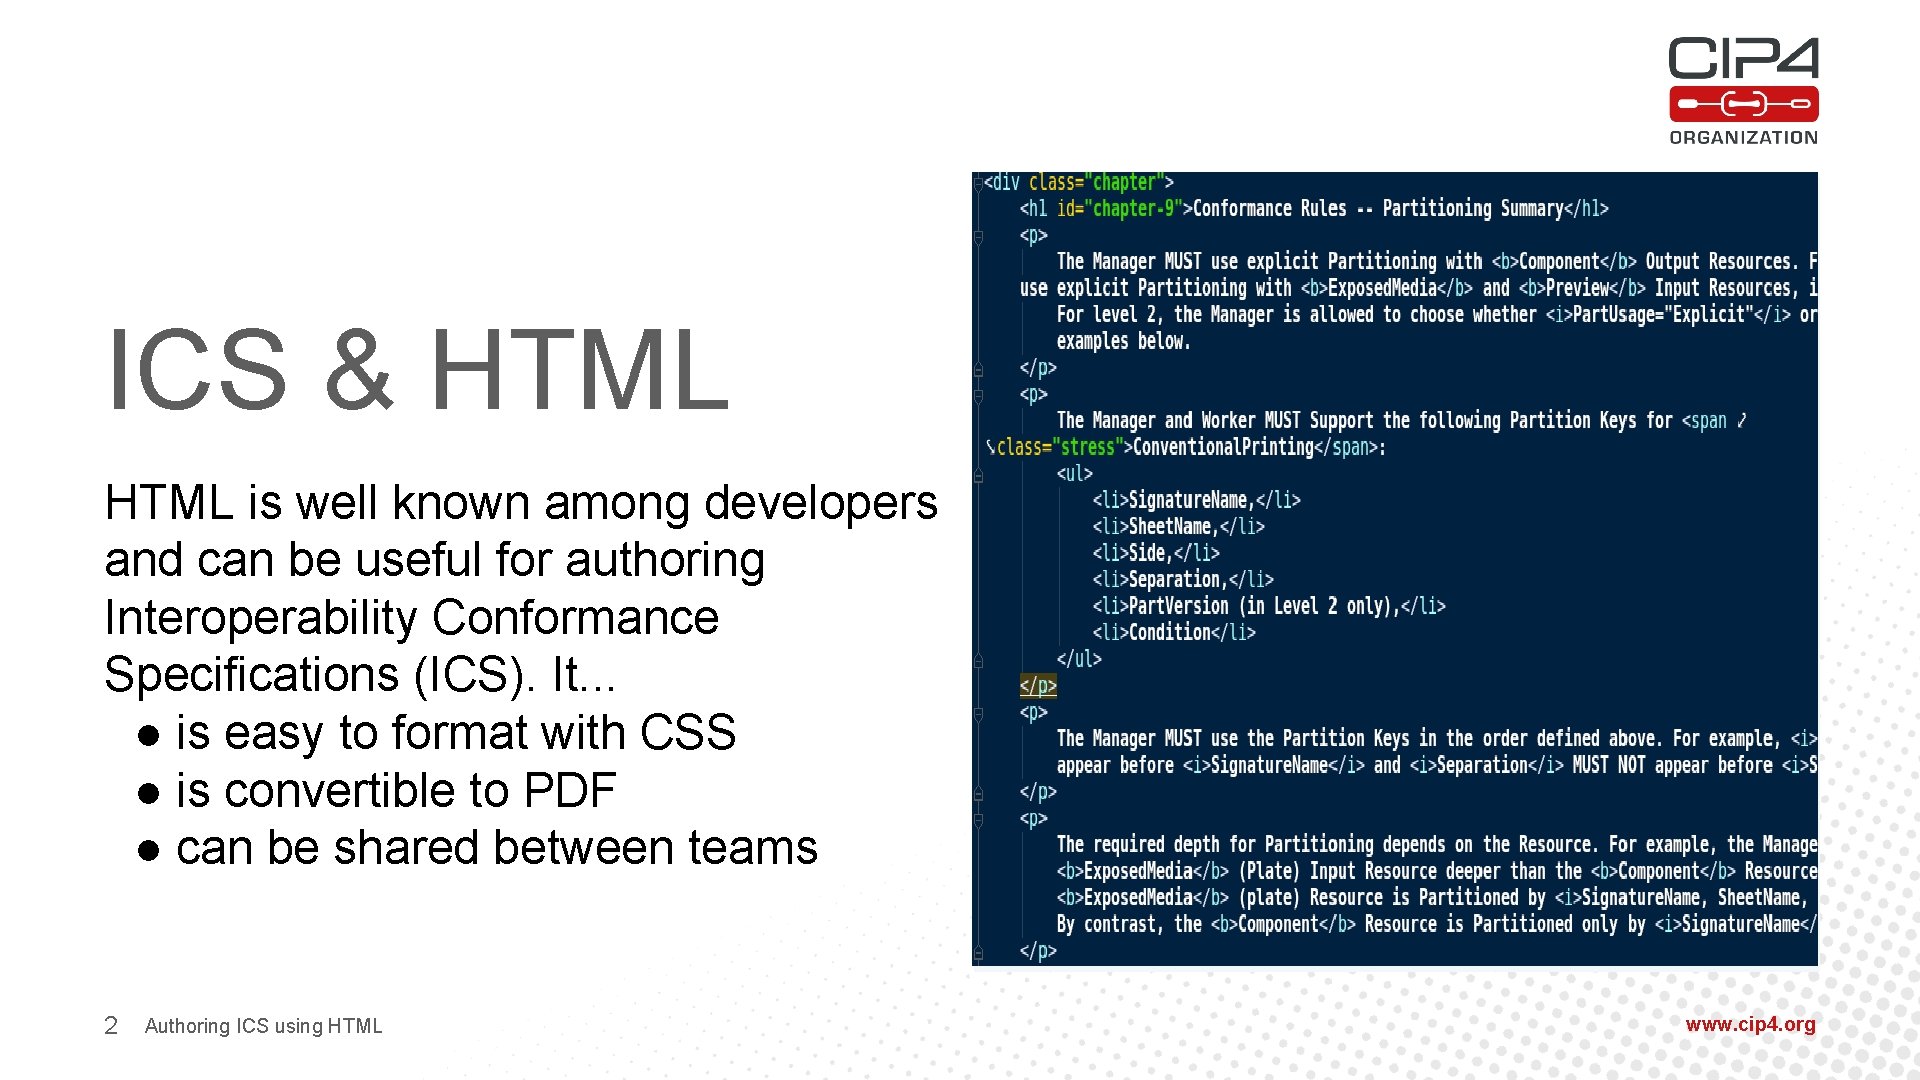 ICS & HTML is well known among developers and can be useful for authoring